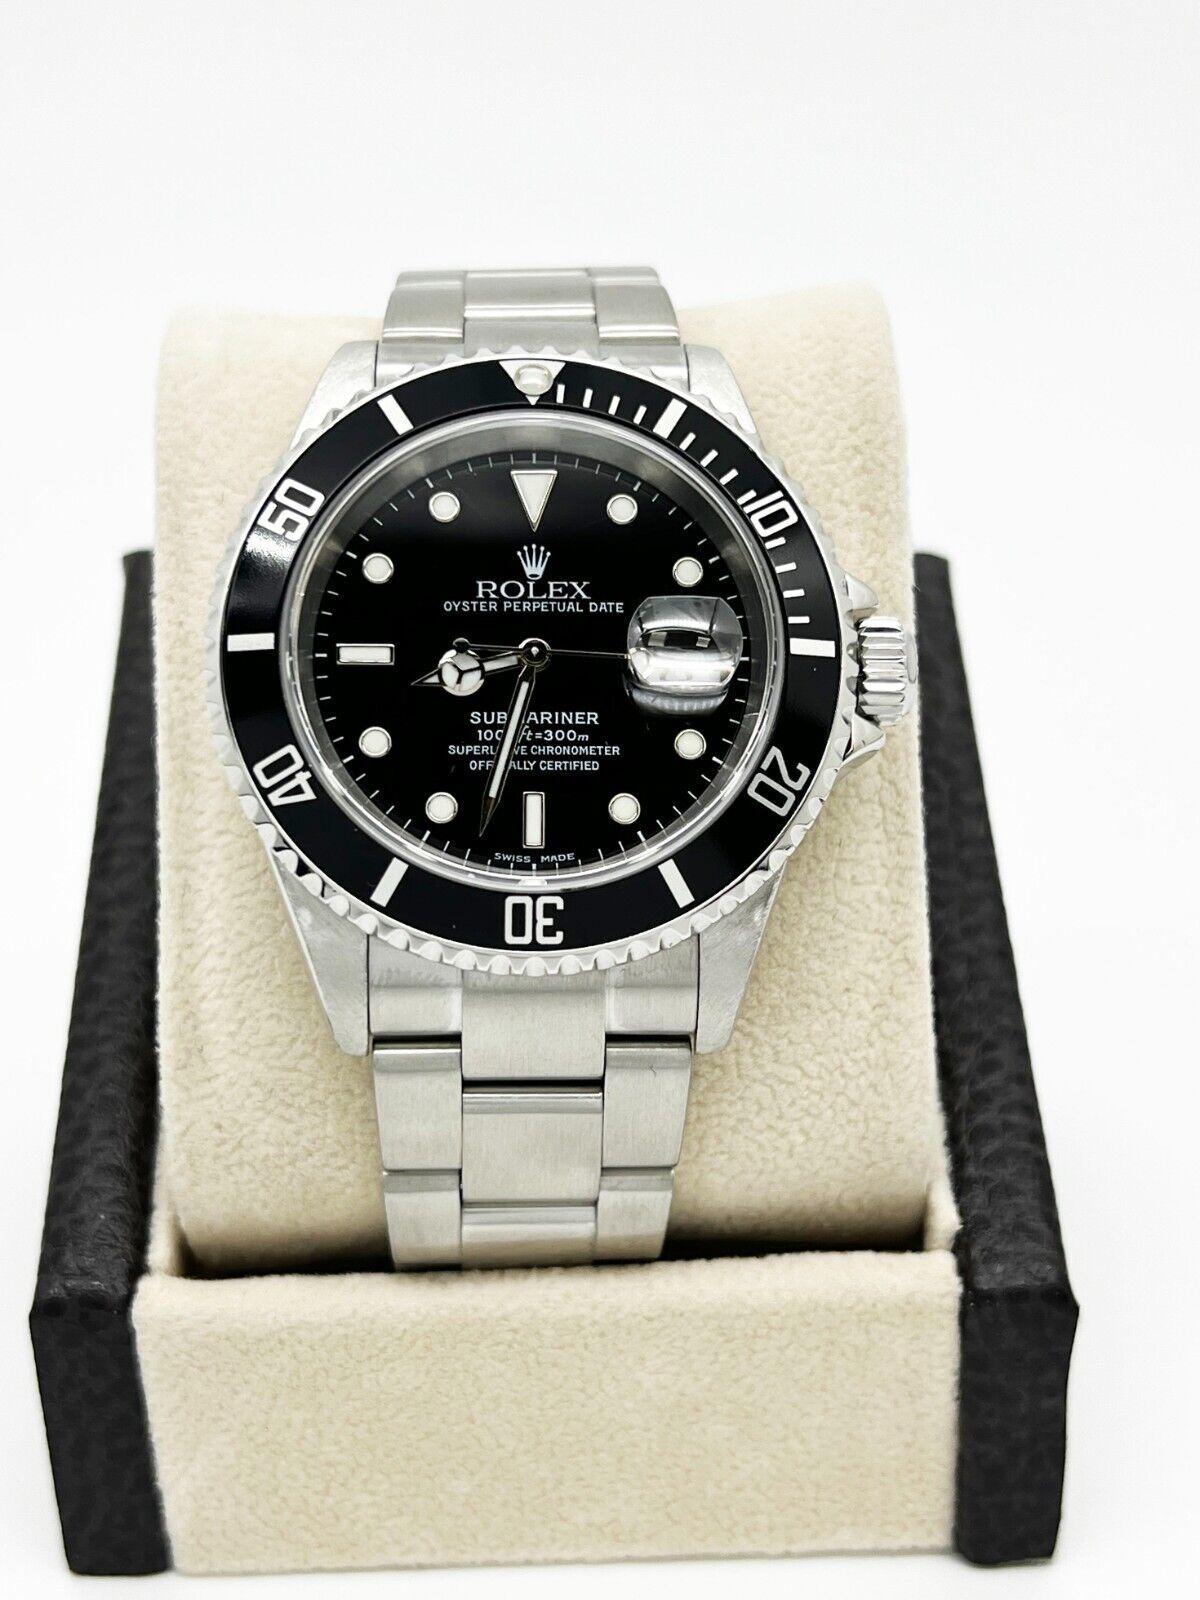 Style Number: 16610

Serial: Y863***

Year: 2003
 
Model: Submariner
 
Case Material: Stainless Steel
 
Band: Stainless Steel
 
Bezel: Black
 
Dial: Black
 
Face: Sapphire Crystal
 
Case Size: 40mm
 
Includes: 
-Rolex Box & Papers
-Certified